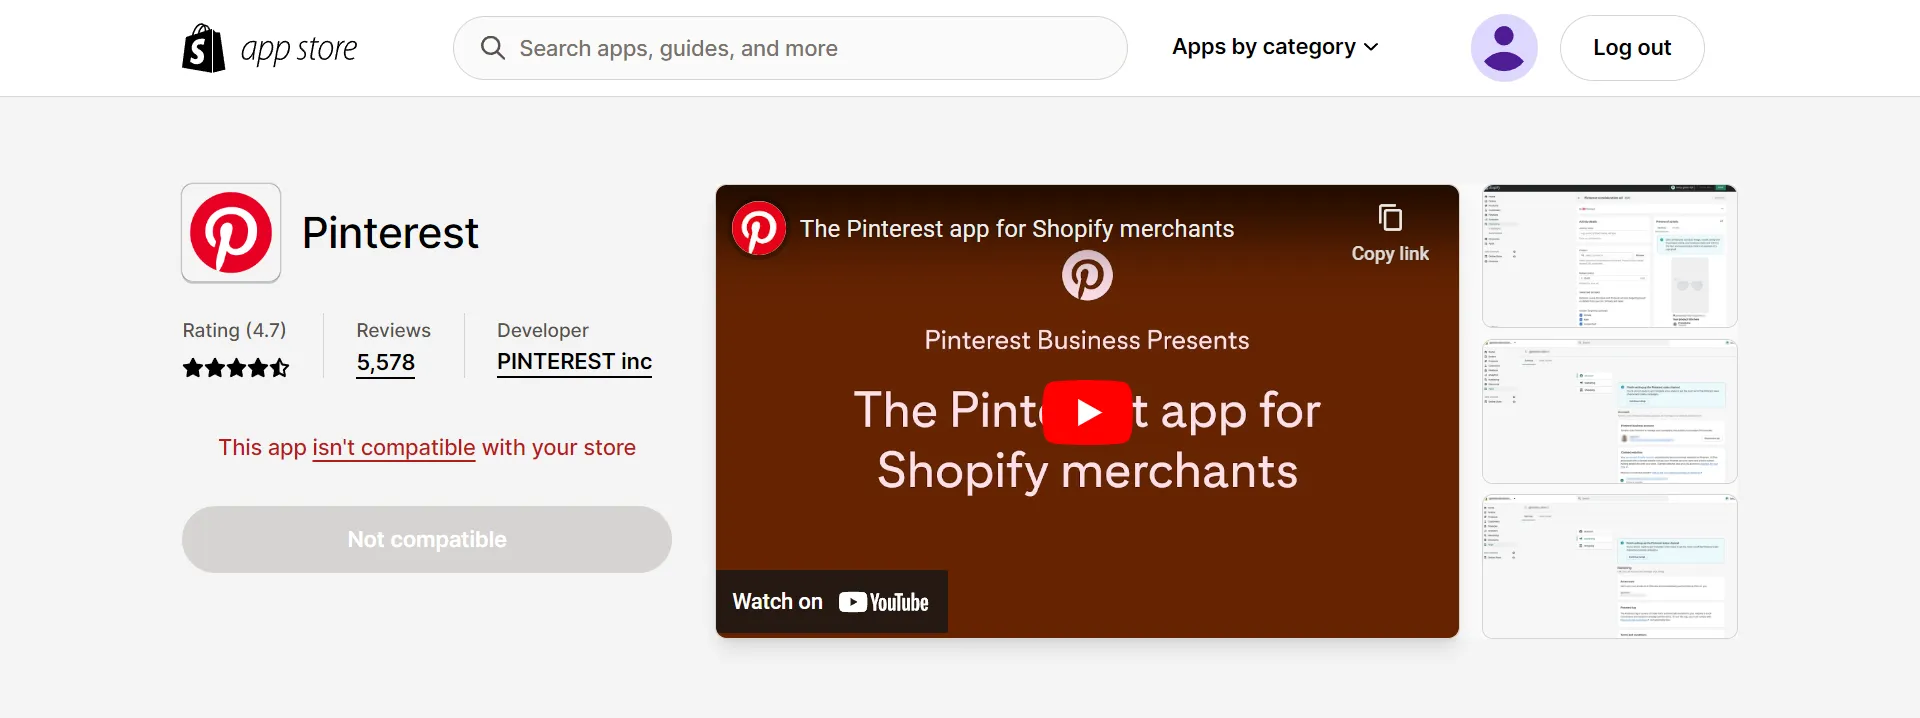 Pinterest app isn’t compatible with Shopify store